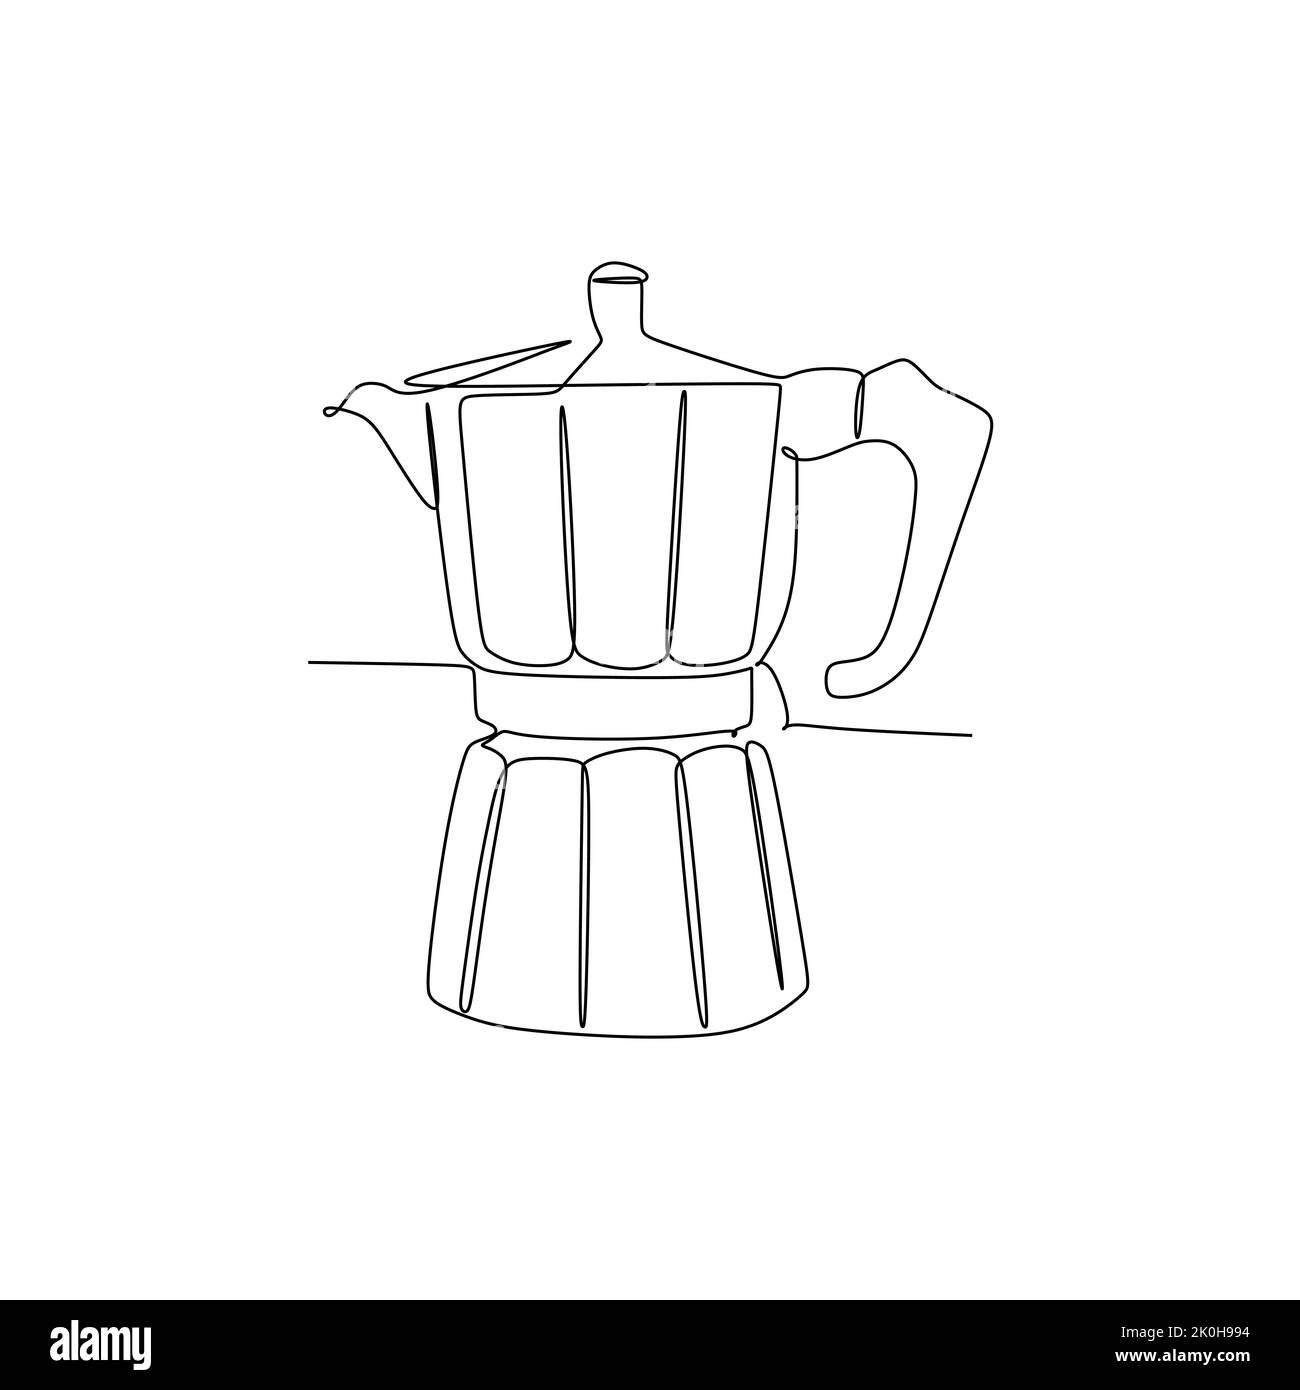 Moka pot coffee maker  - Continuous one line drawing vector illustration hand drawn style design for food and beverages concept Stock Vector